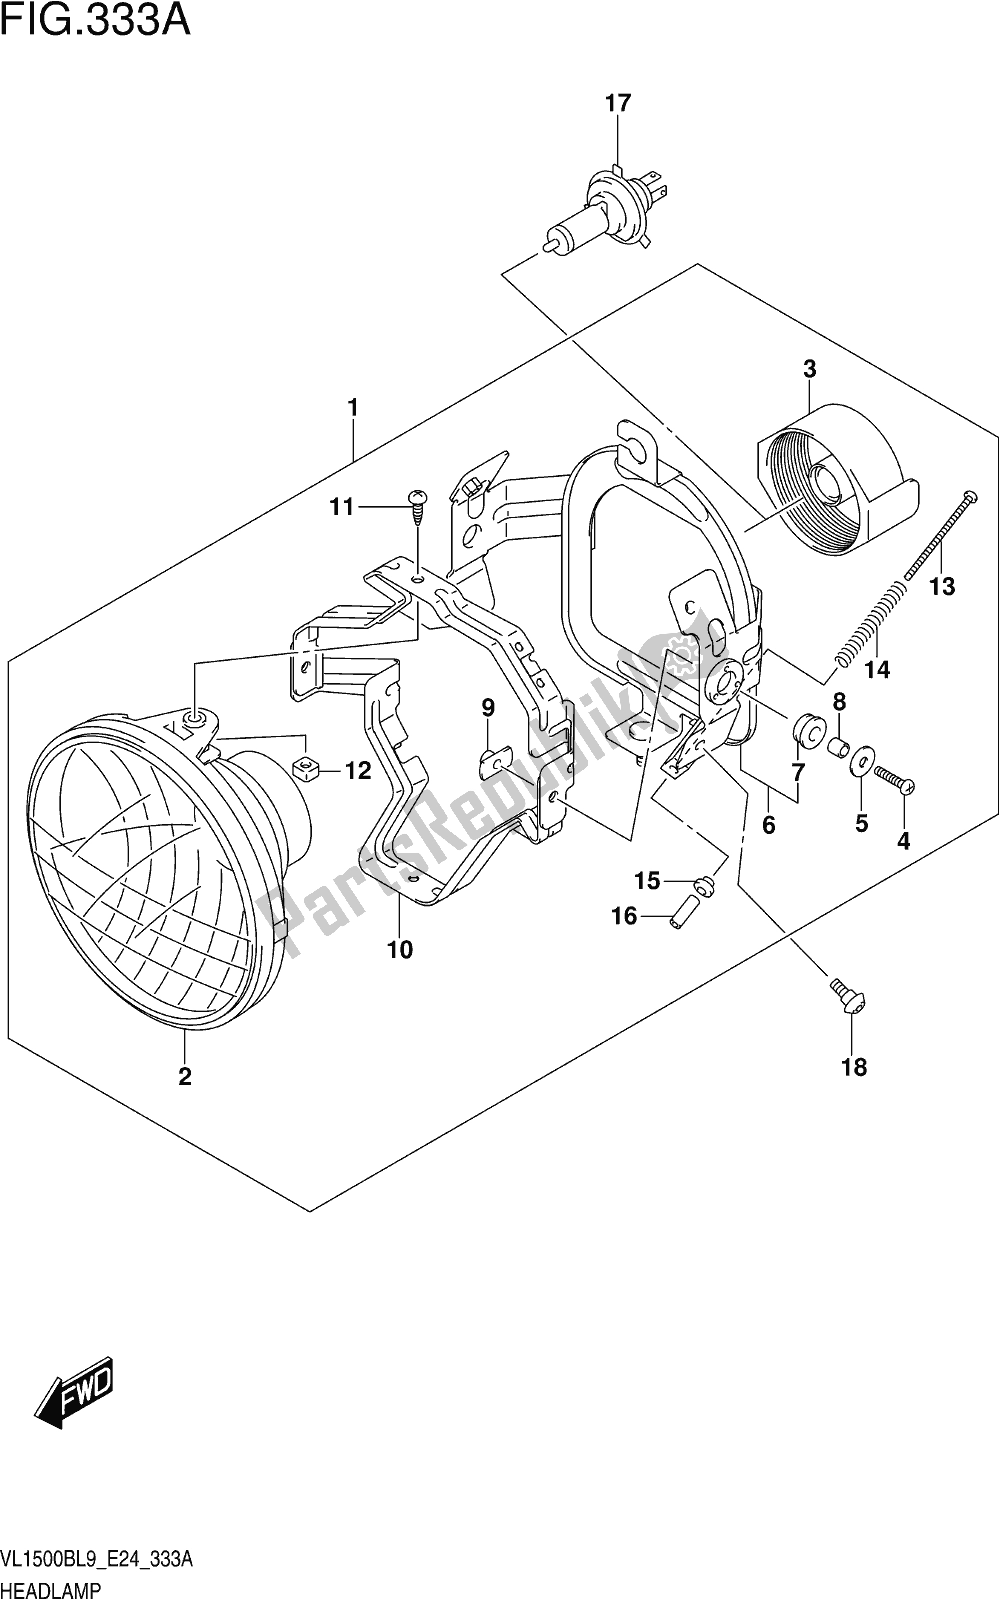 All parts for the Fig. 333a Headlamp of the Suzuki VL 1500B 2019